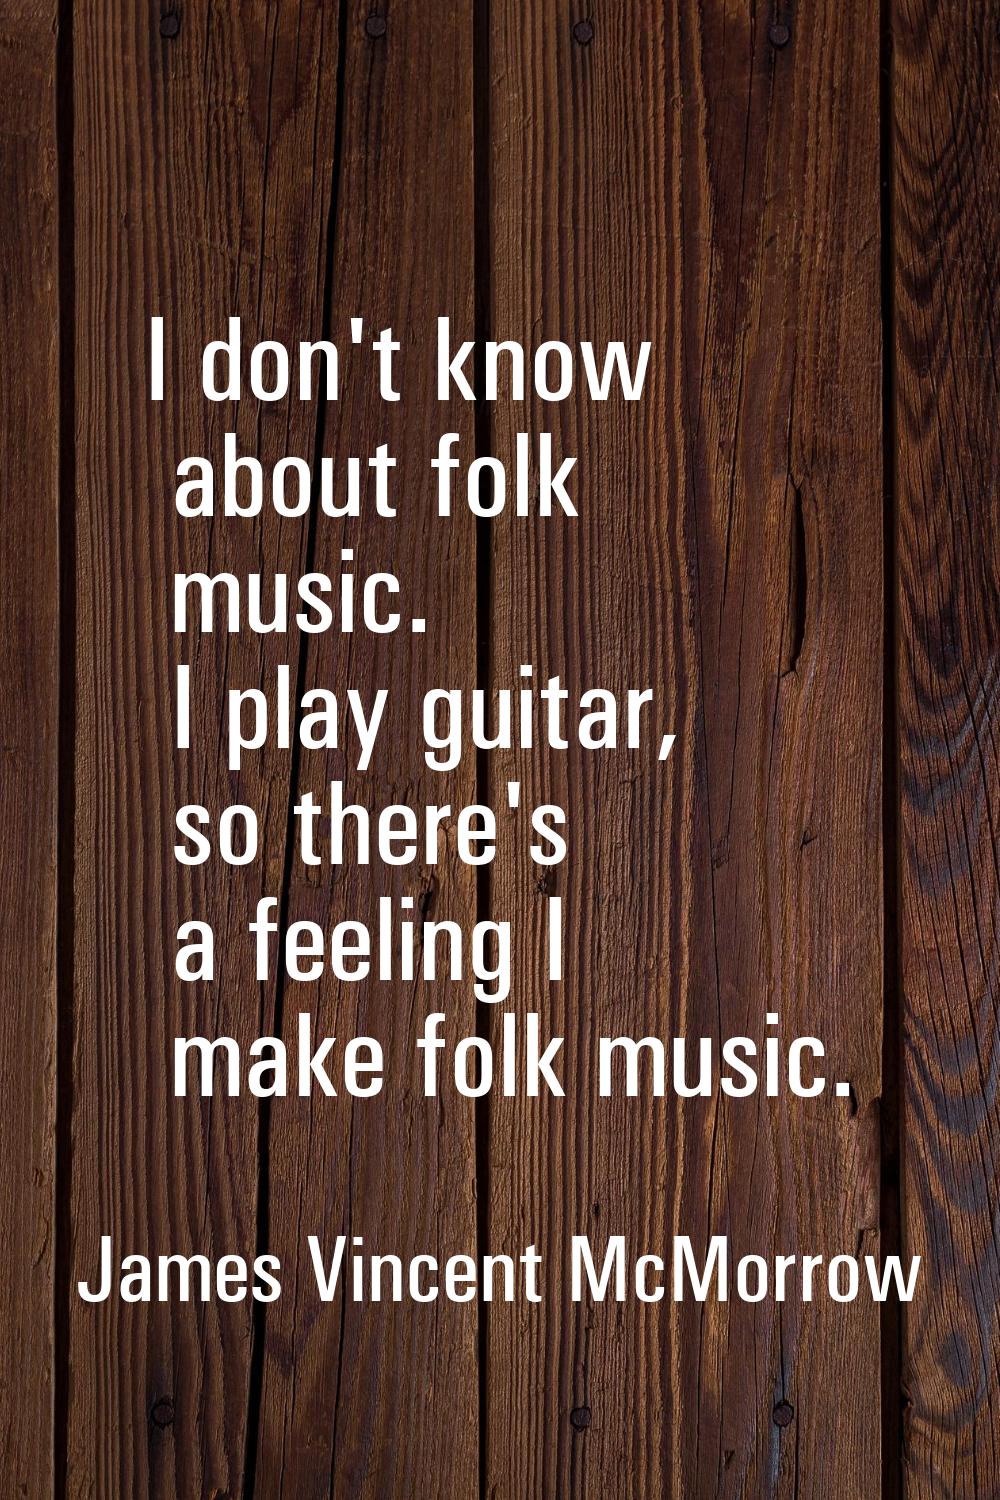 I don't know about folk music. I play guitar, so there's a feeling I make folk music.